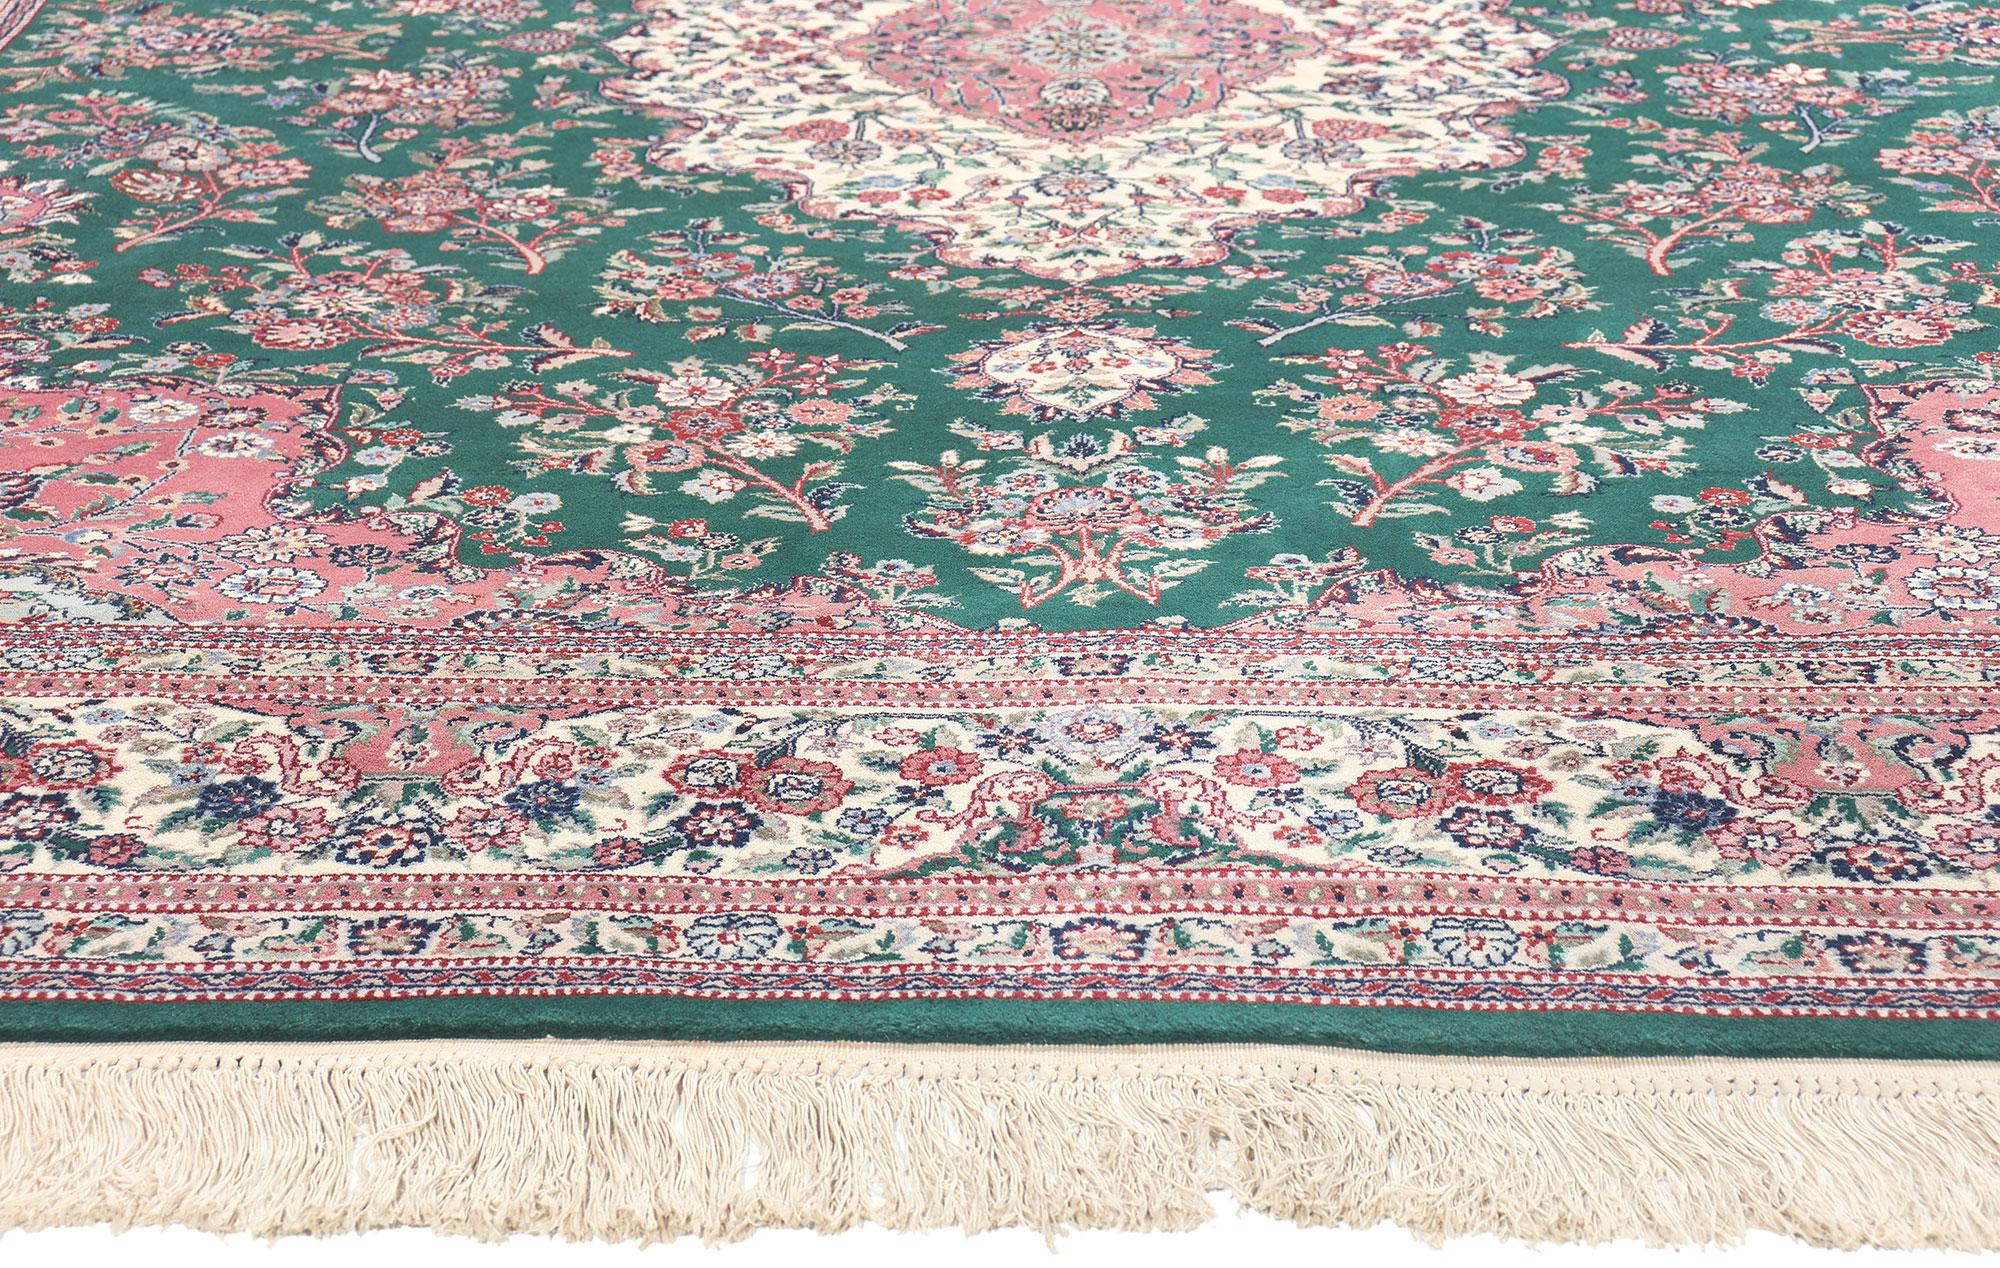 Wool & Silk Vintage Chinese Tabriz Rug, English Chintz Meets Maximalist Opulence In Good Condition For Sale In Dallas, TX